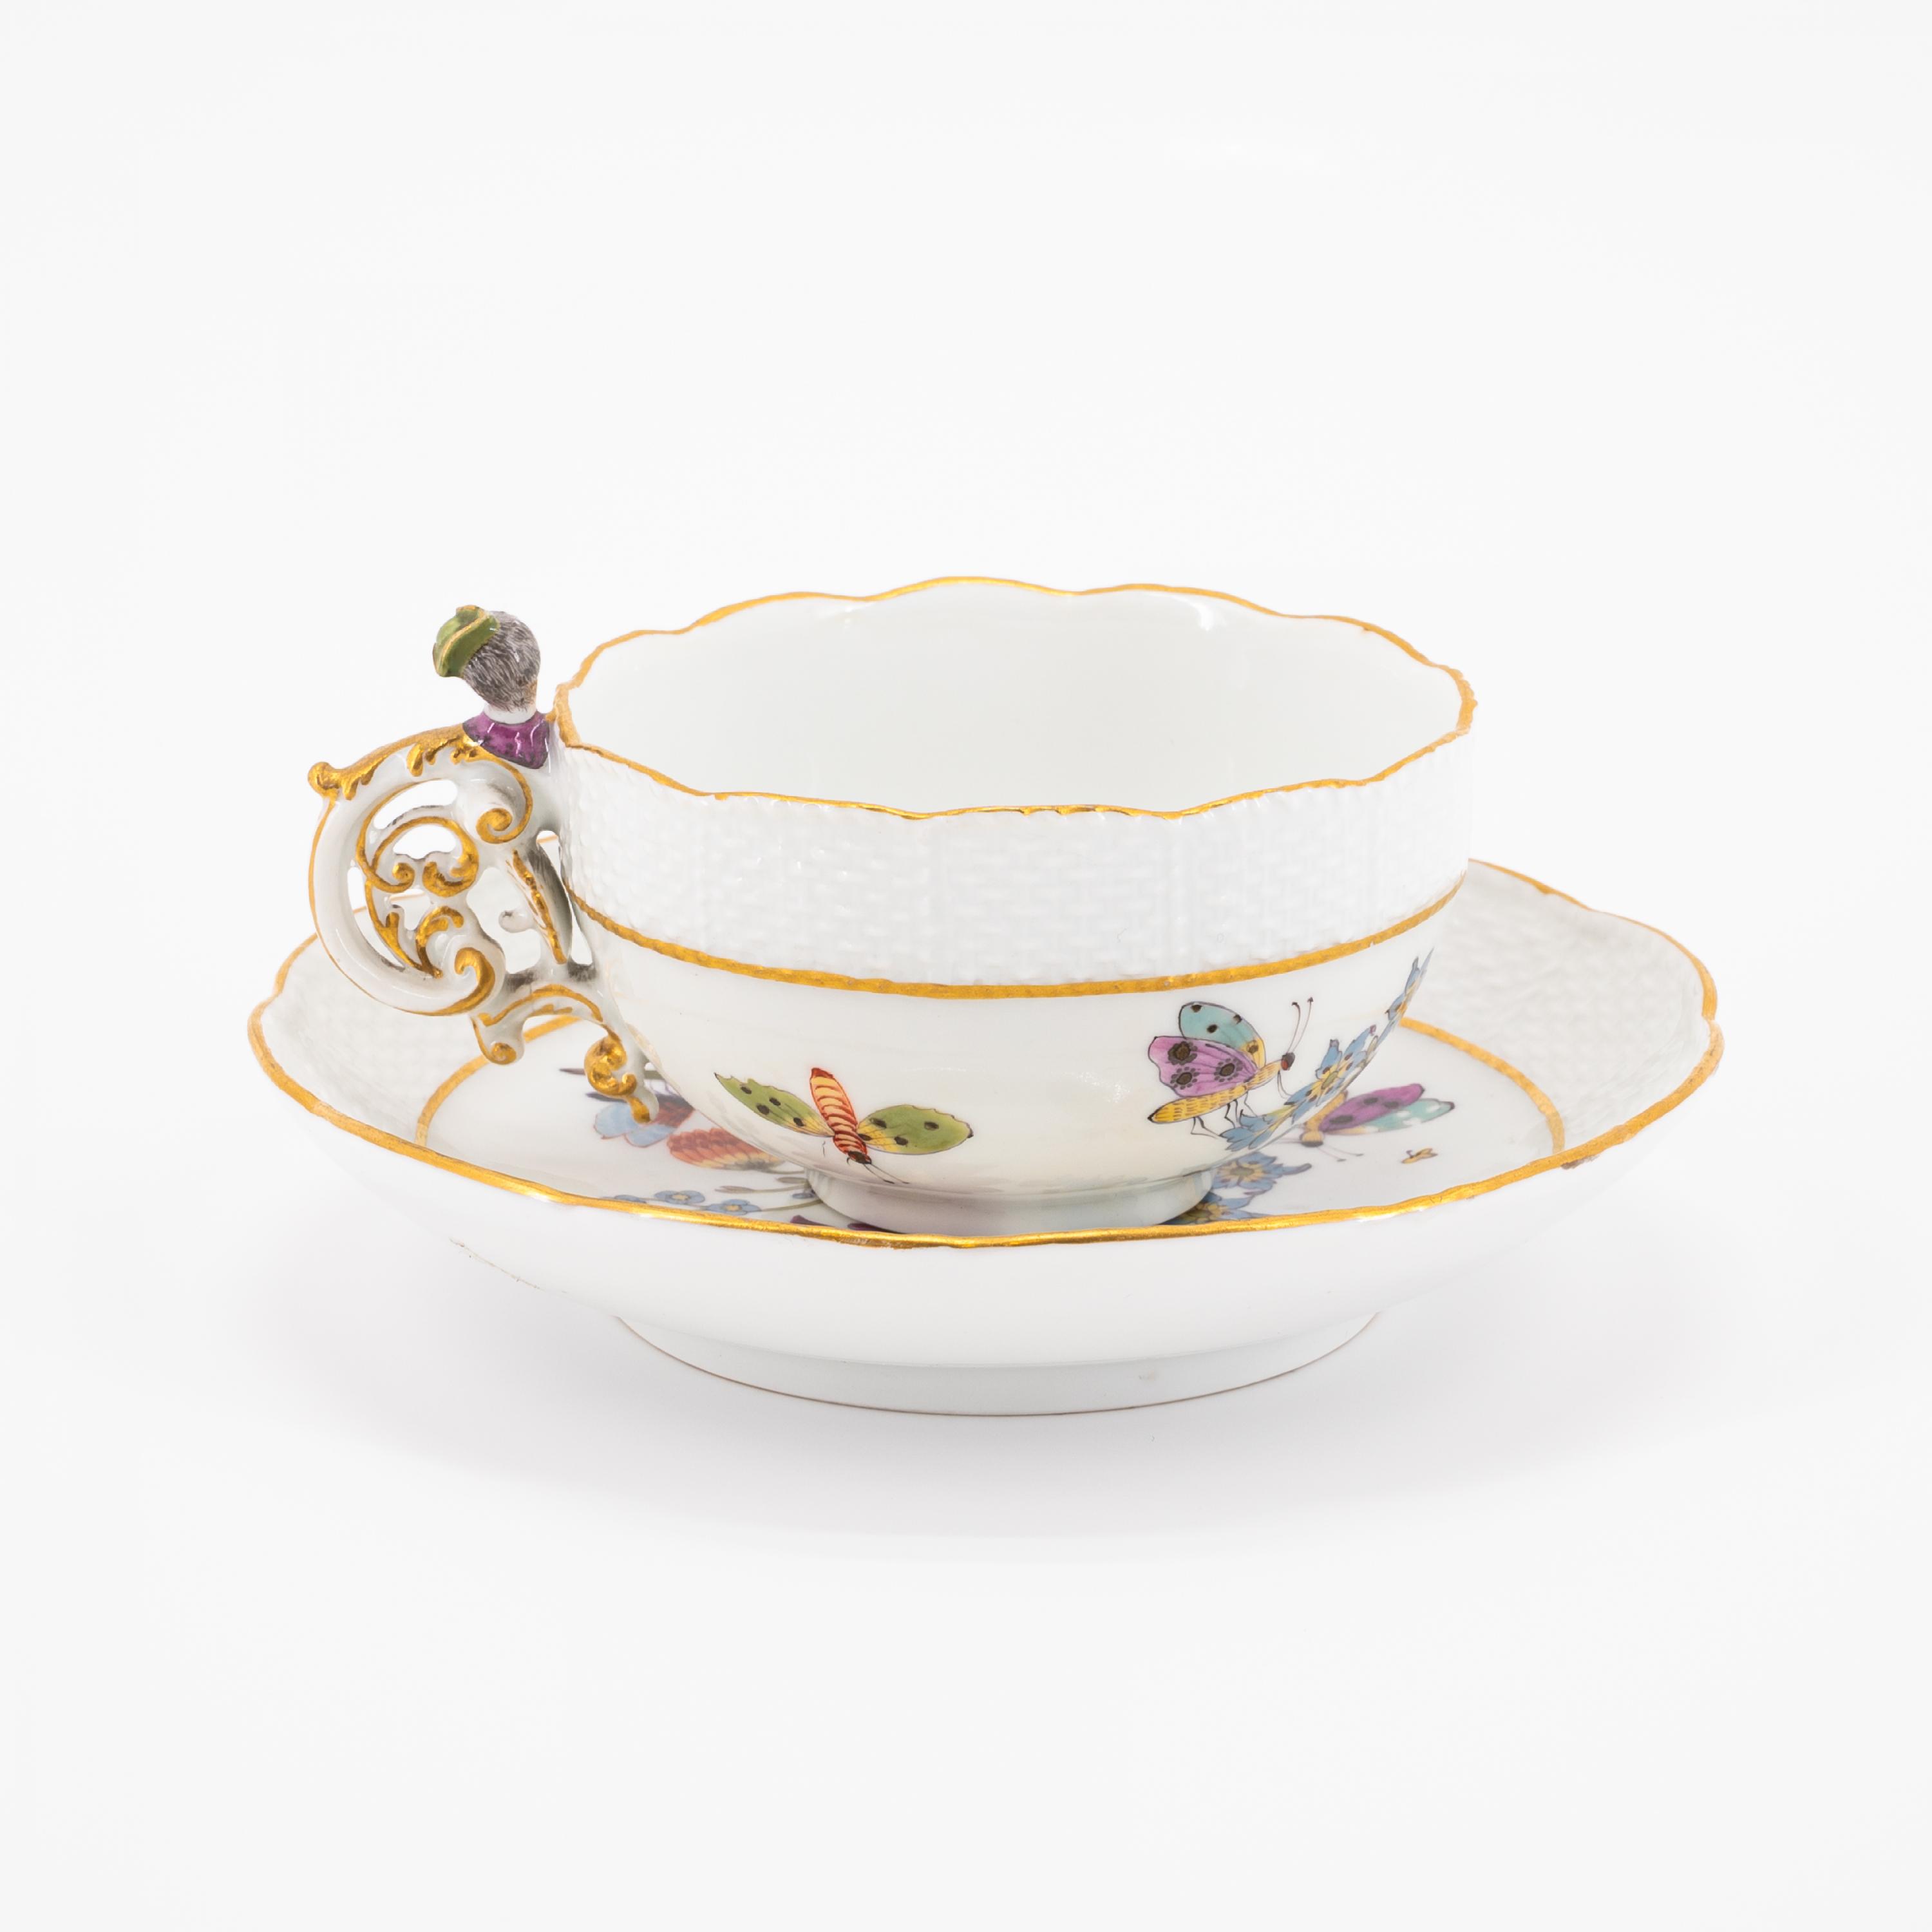 PORCELAIN COFFEE POT, CUP AND SAUCER WITH BUTTERFLY DECOR - Image 3 of 11